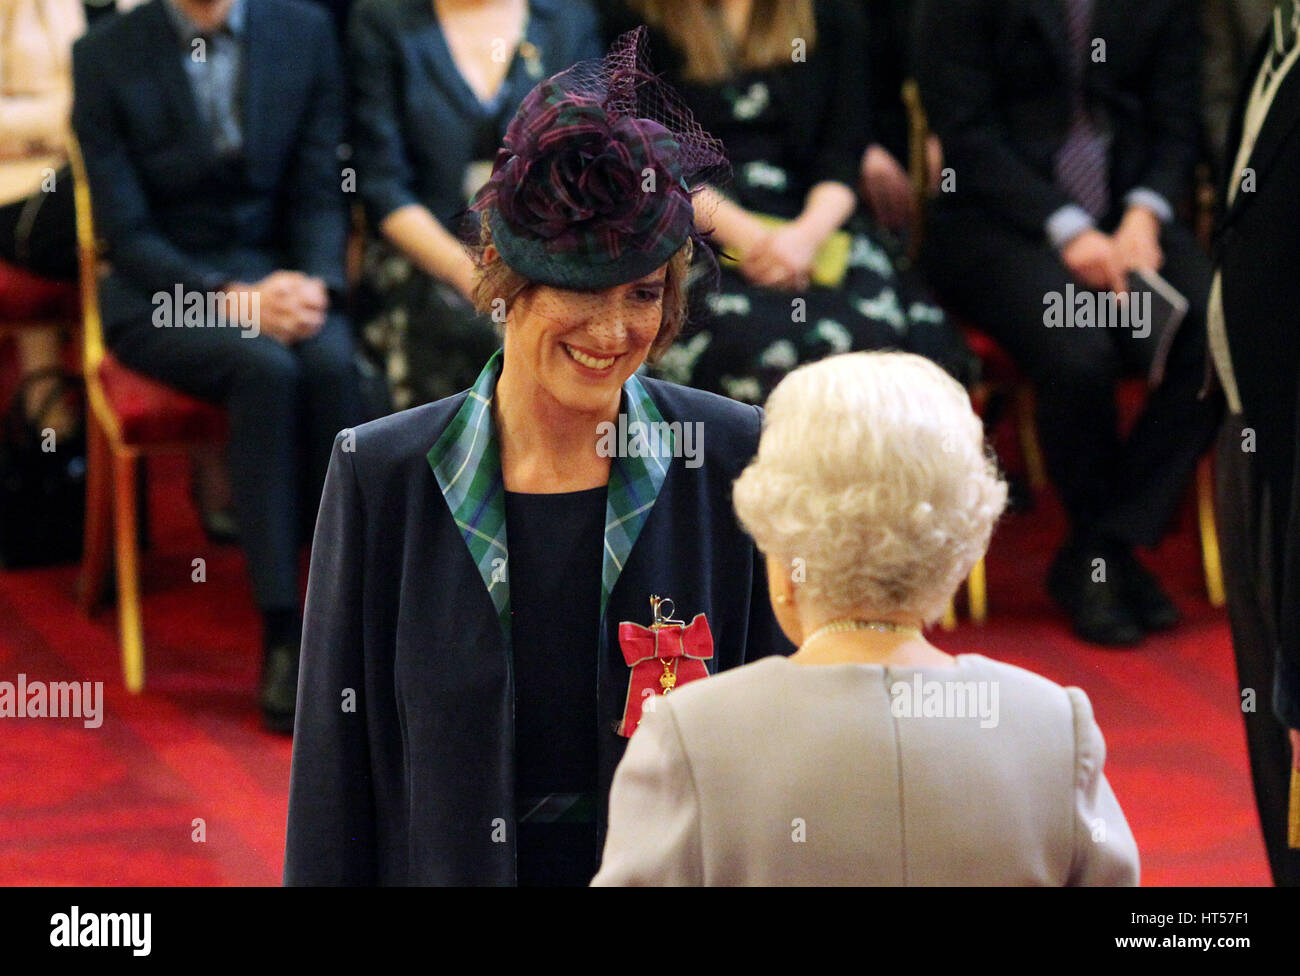 Dame Katherine Grainger from Maidenhead is made a Dame Commander of the British Empire by Queen Elizabeth II at Buckingham Palace. Stock Photo